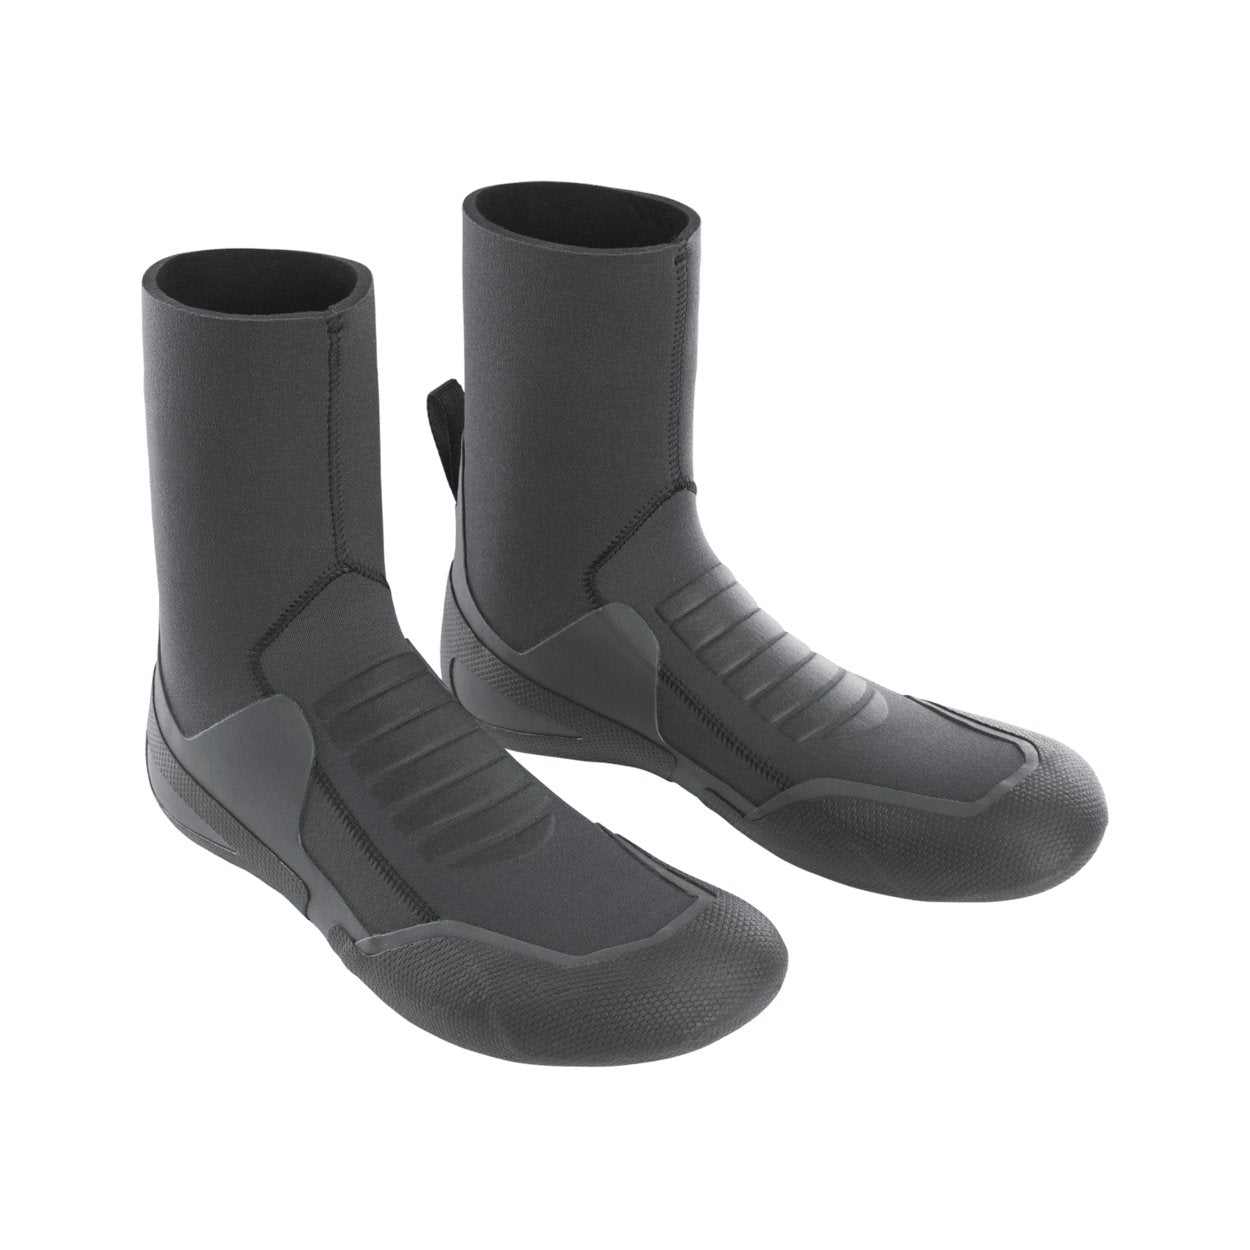 ION Plasma Boots 6/5 Round Toe 2023 - Worthing Watersports - 9010583093024 - Footwear - ION Water